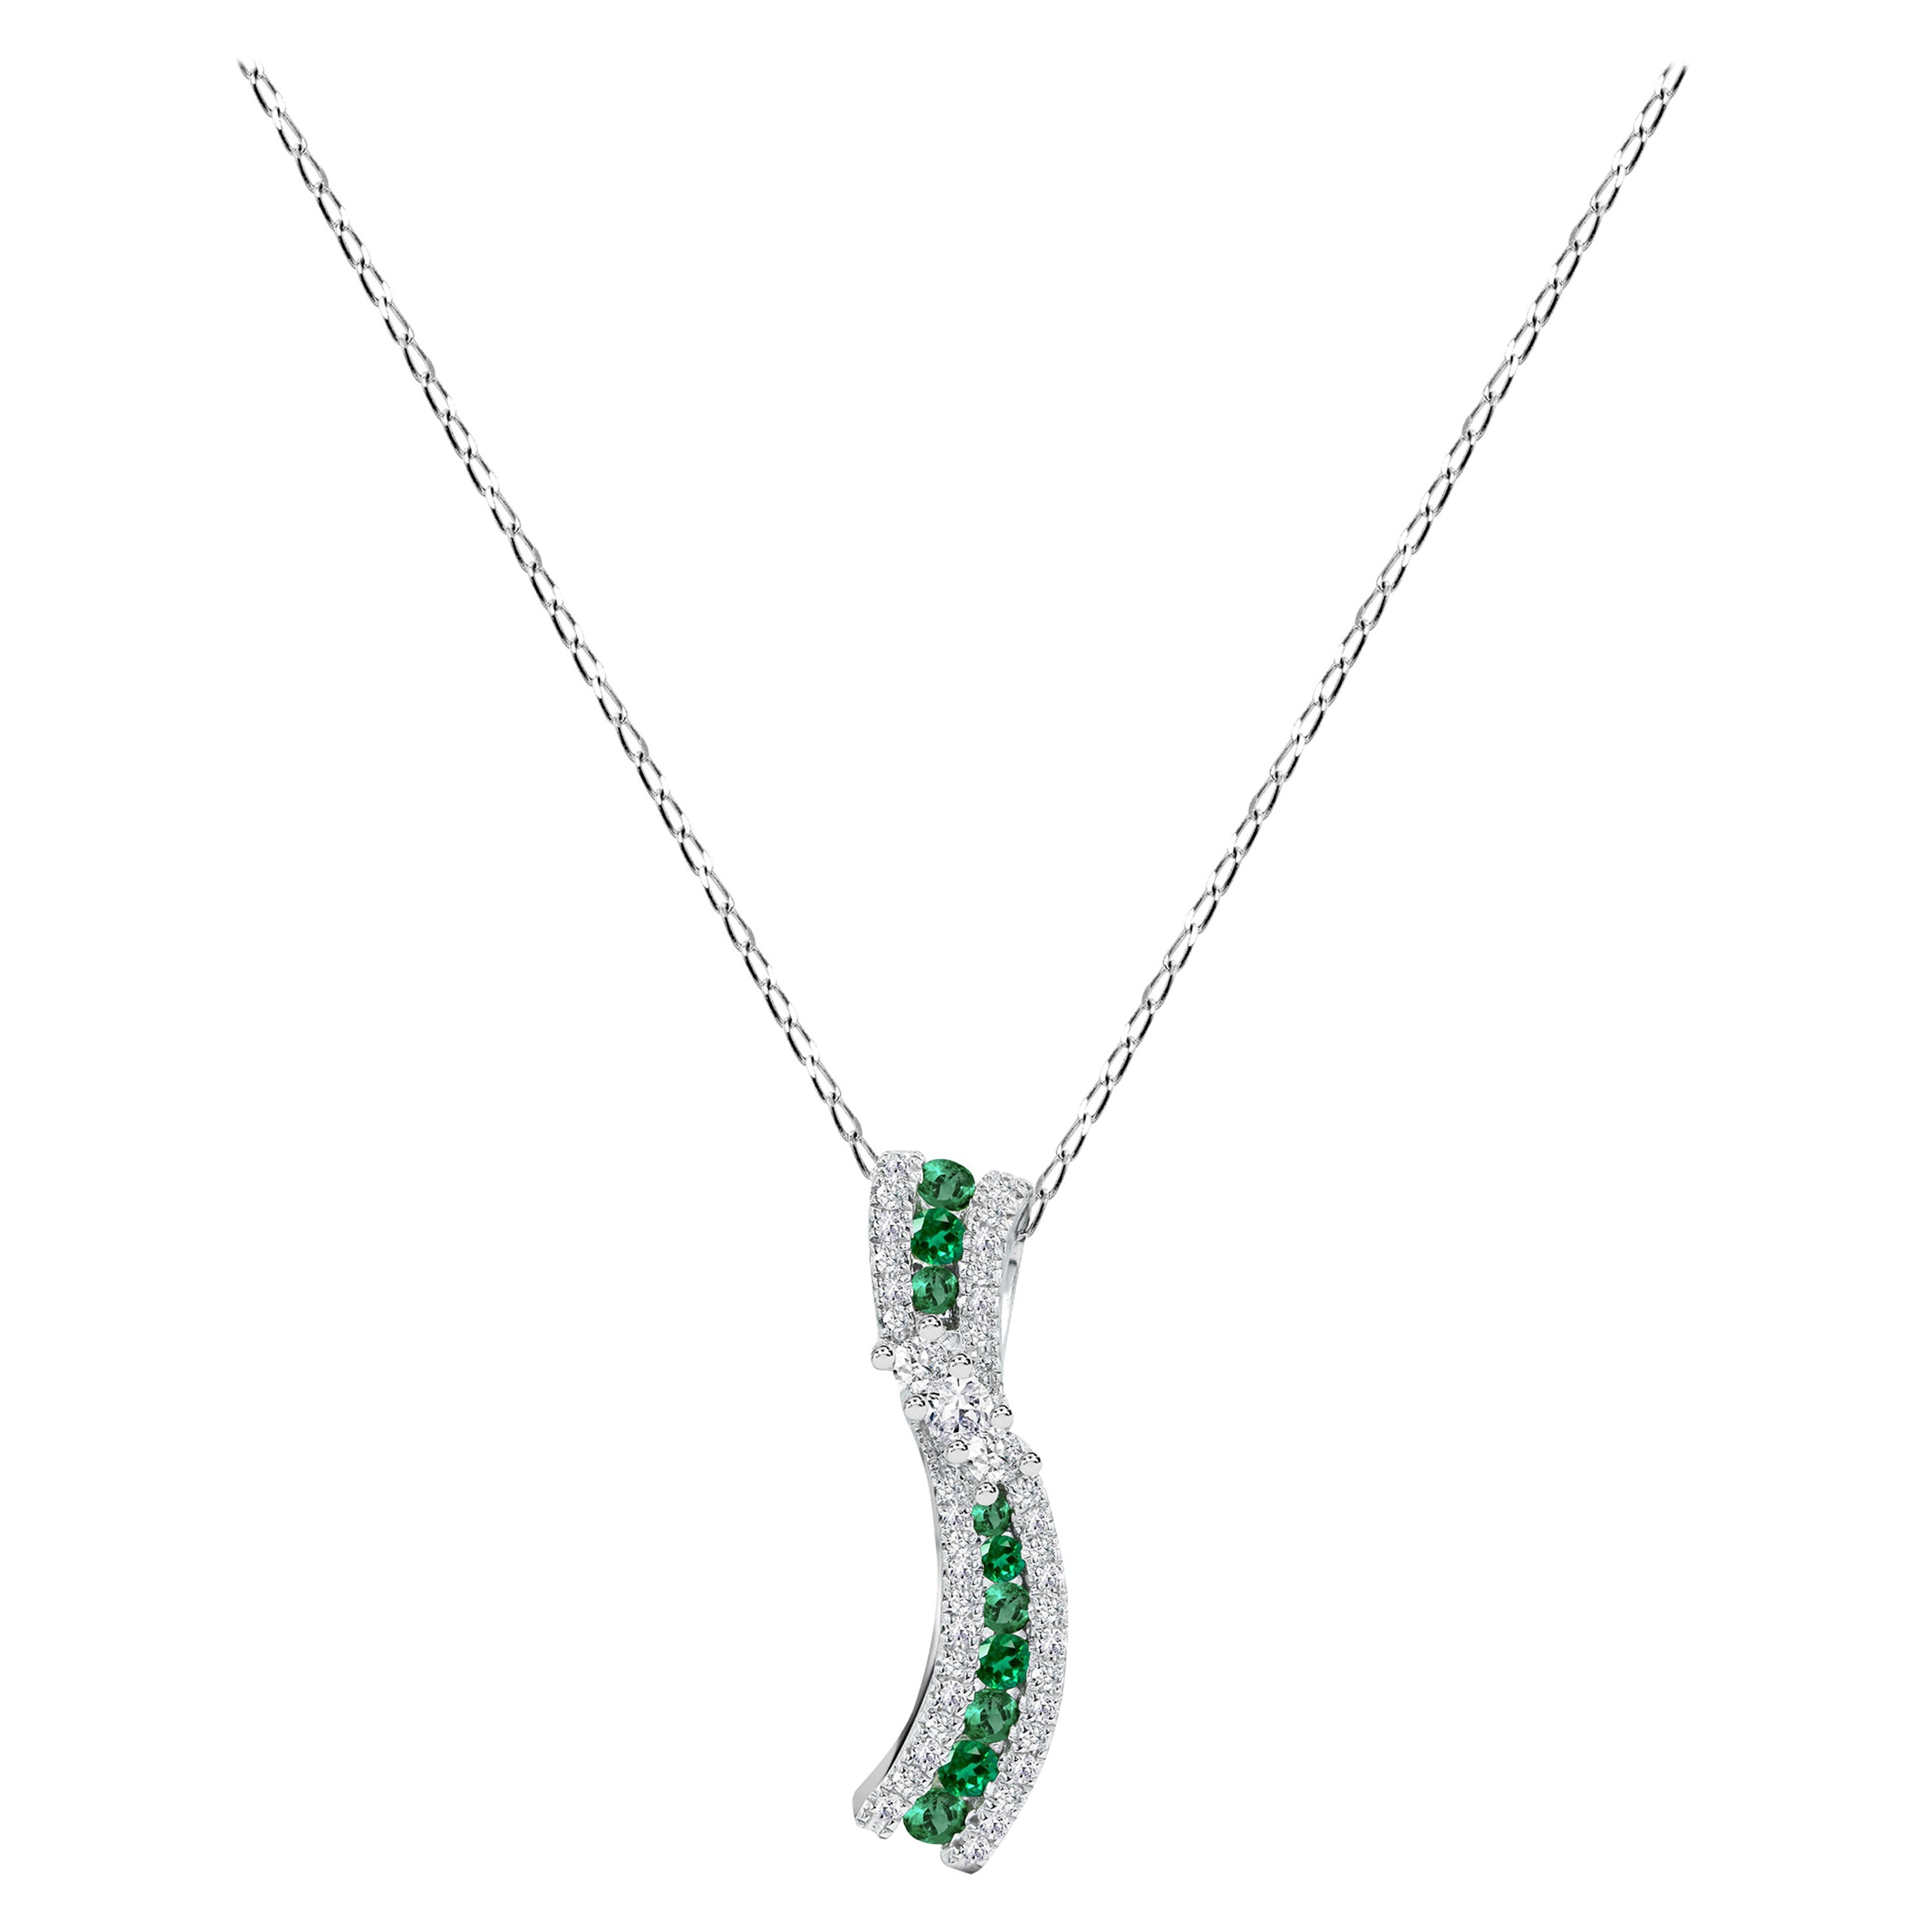 1.15 Ct Diamond and Emerald Necklace in 18k Gold